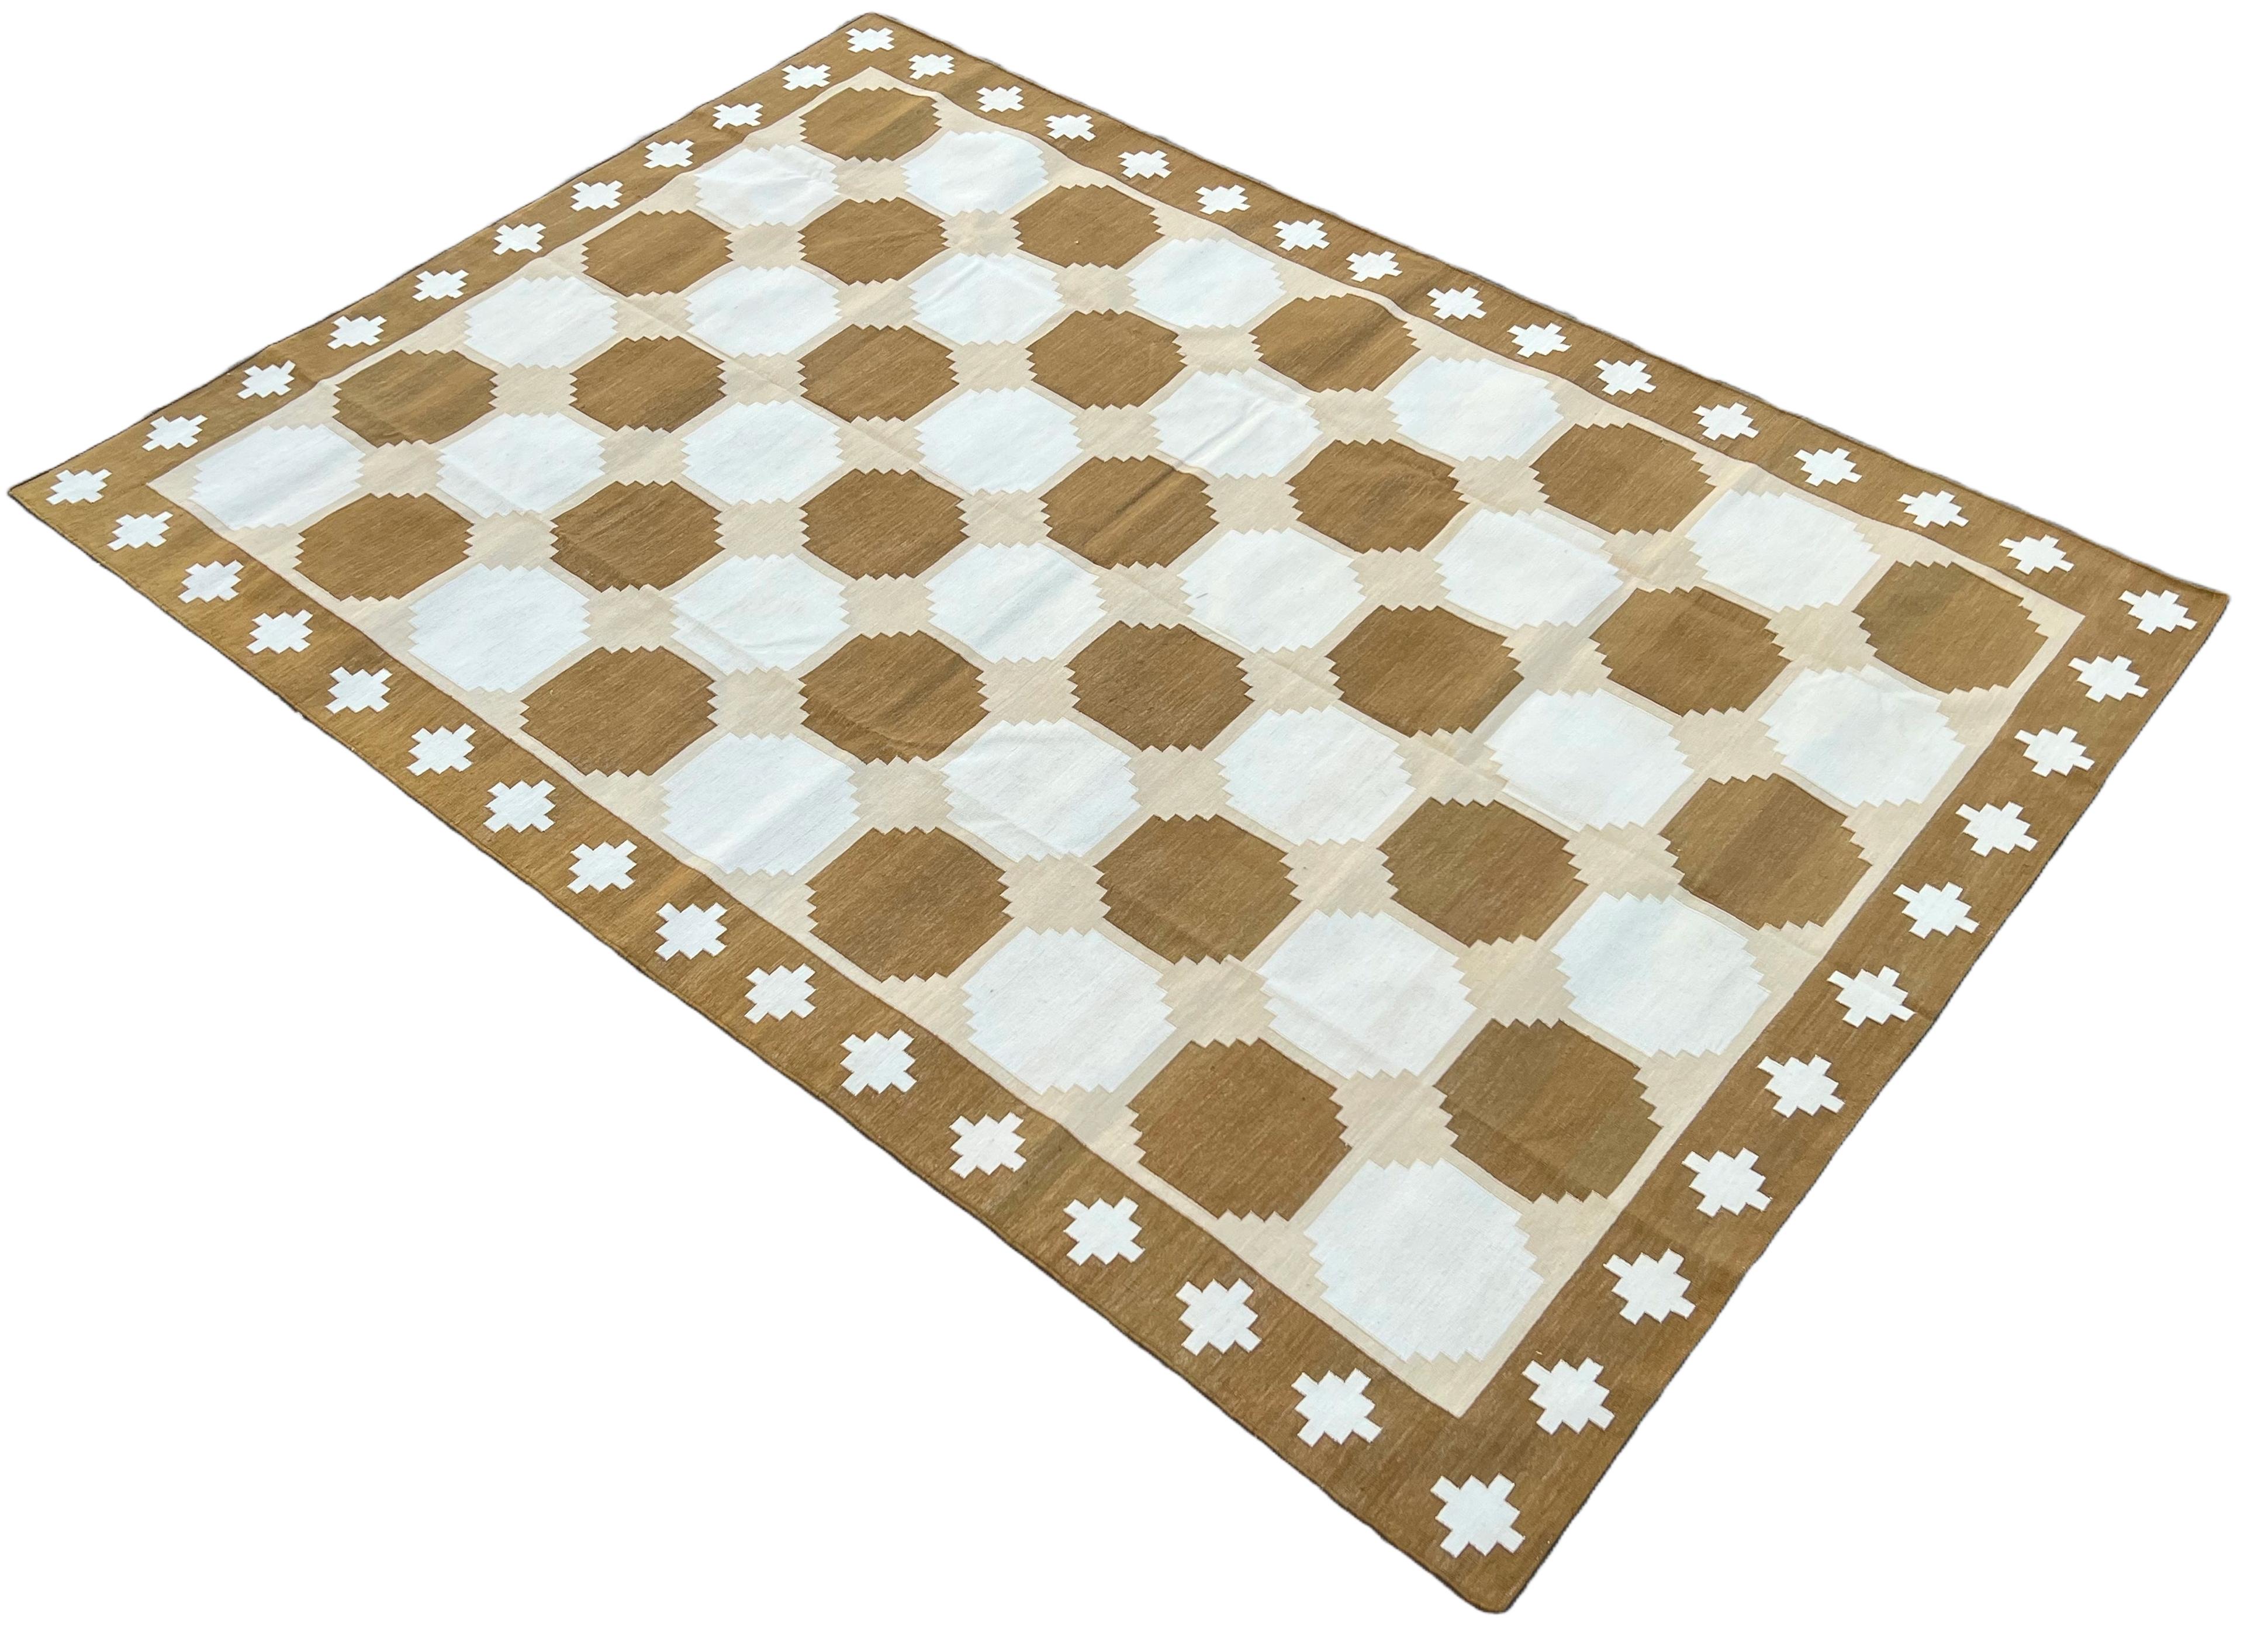 Hand-Woven Handmade Cotton Area Flat Weave Rug, Beige & Brown Indian Star Geometric Dhurrie For Sale